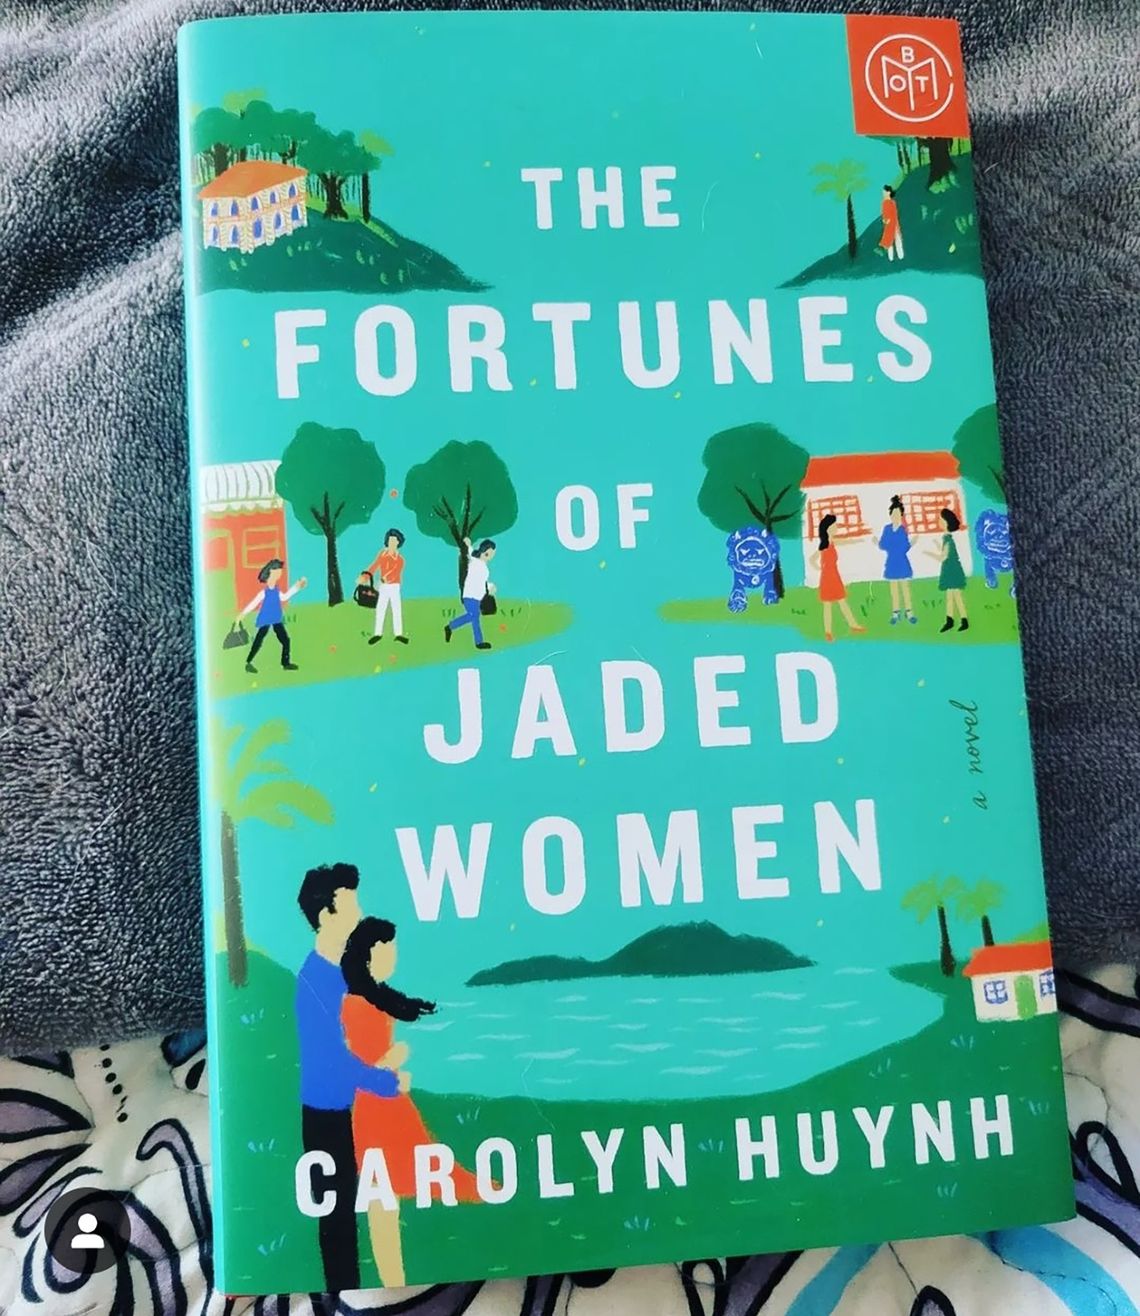 Allsion's Book Report: “The Fortunes of Jaded Women” by Carolyn Huynh